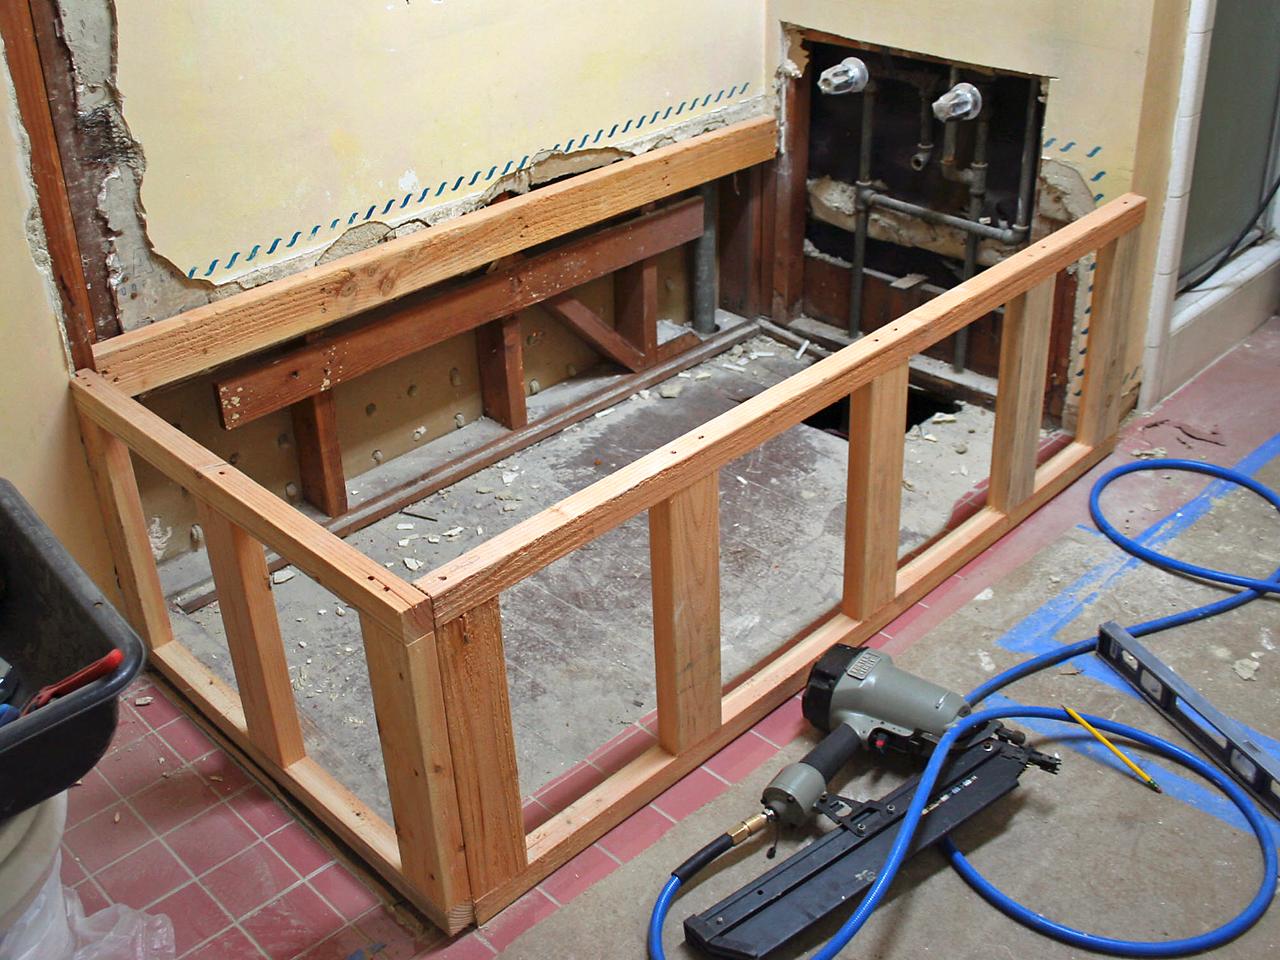 Replacing A Bathtub With Deck Tub, How To Build A Frame For Drop In Bathtub